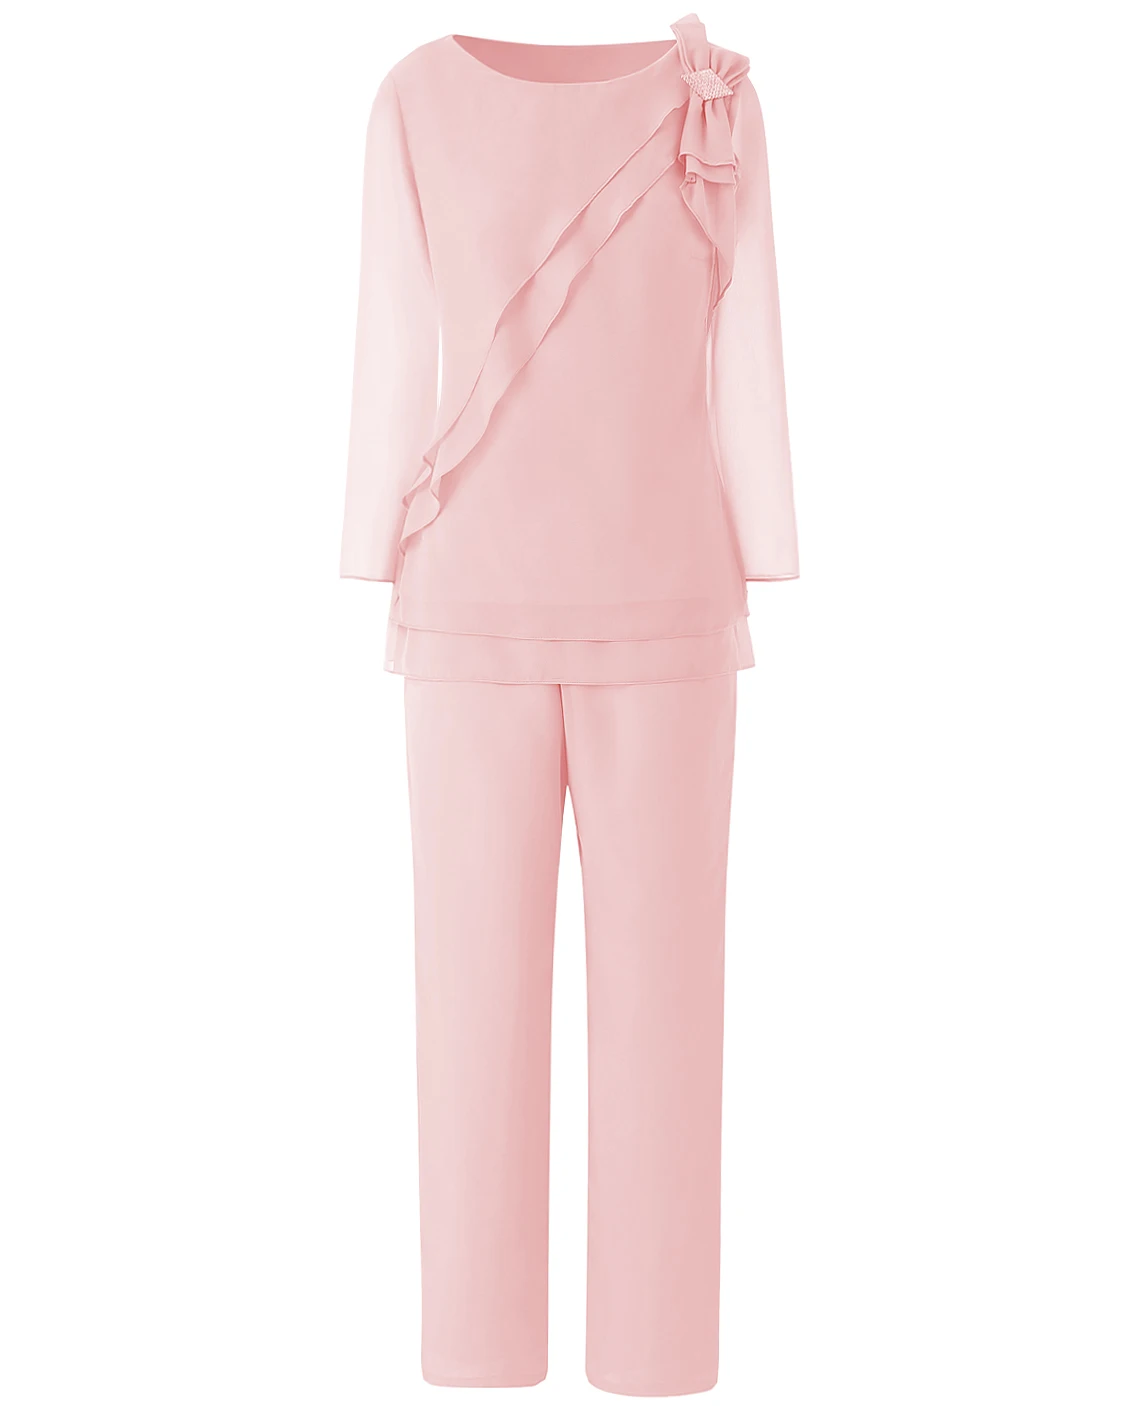 Limited  Pink bow-knot Women Chiffon 2 Two Pcs Mother of the Groom Dress Pantsuits with Long Sleeves Outfit 